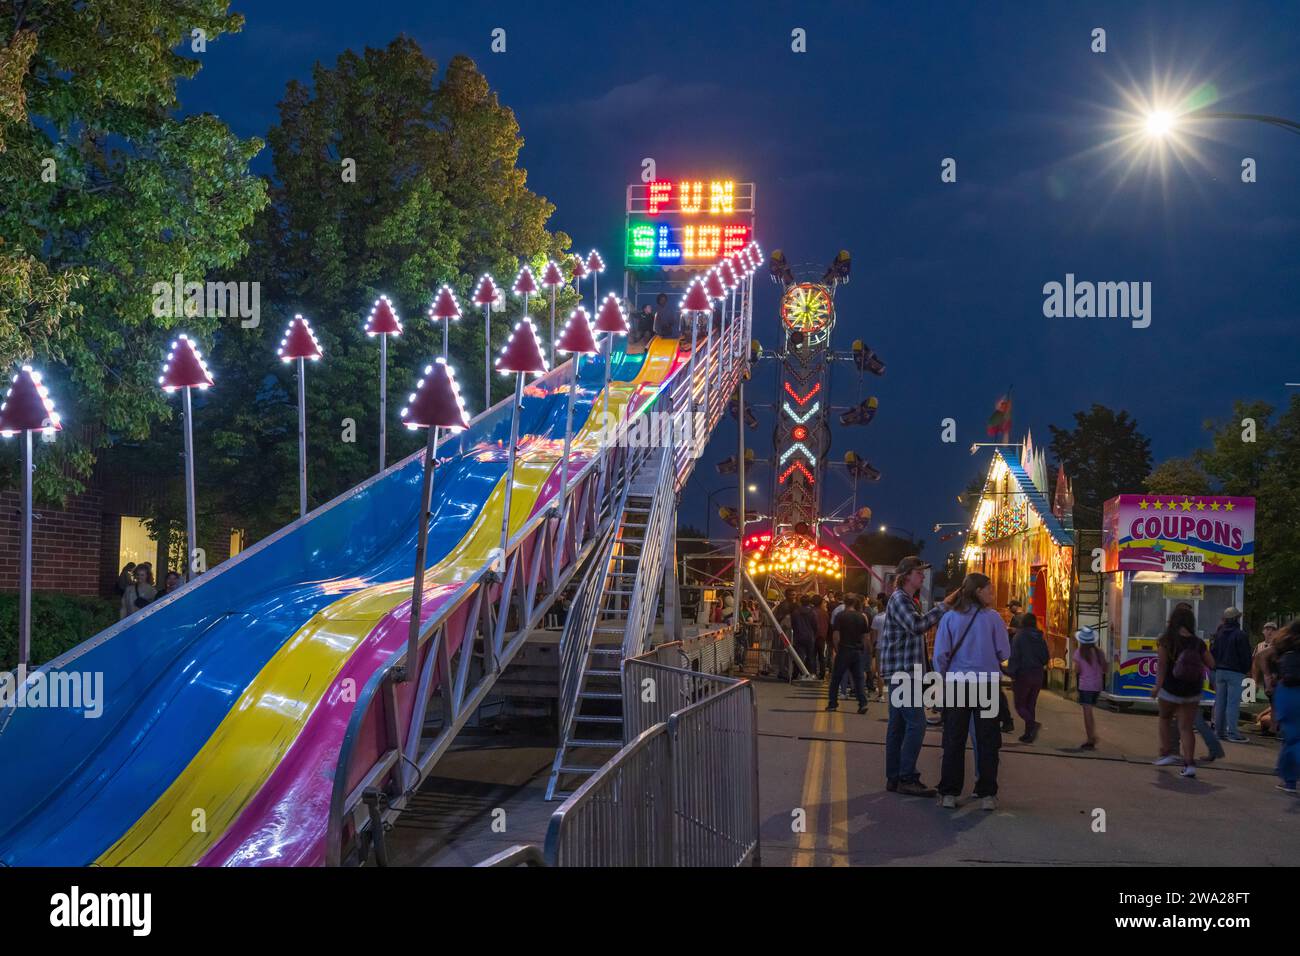 The Wonder Shows midway illuminated at night in Morden, Manitoba, Canada. Stock Photo